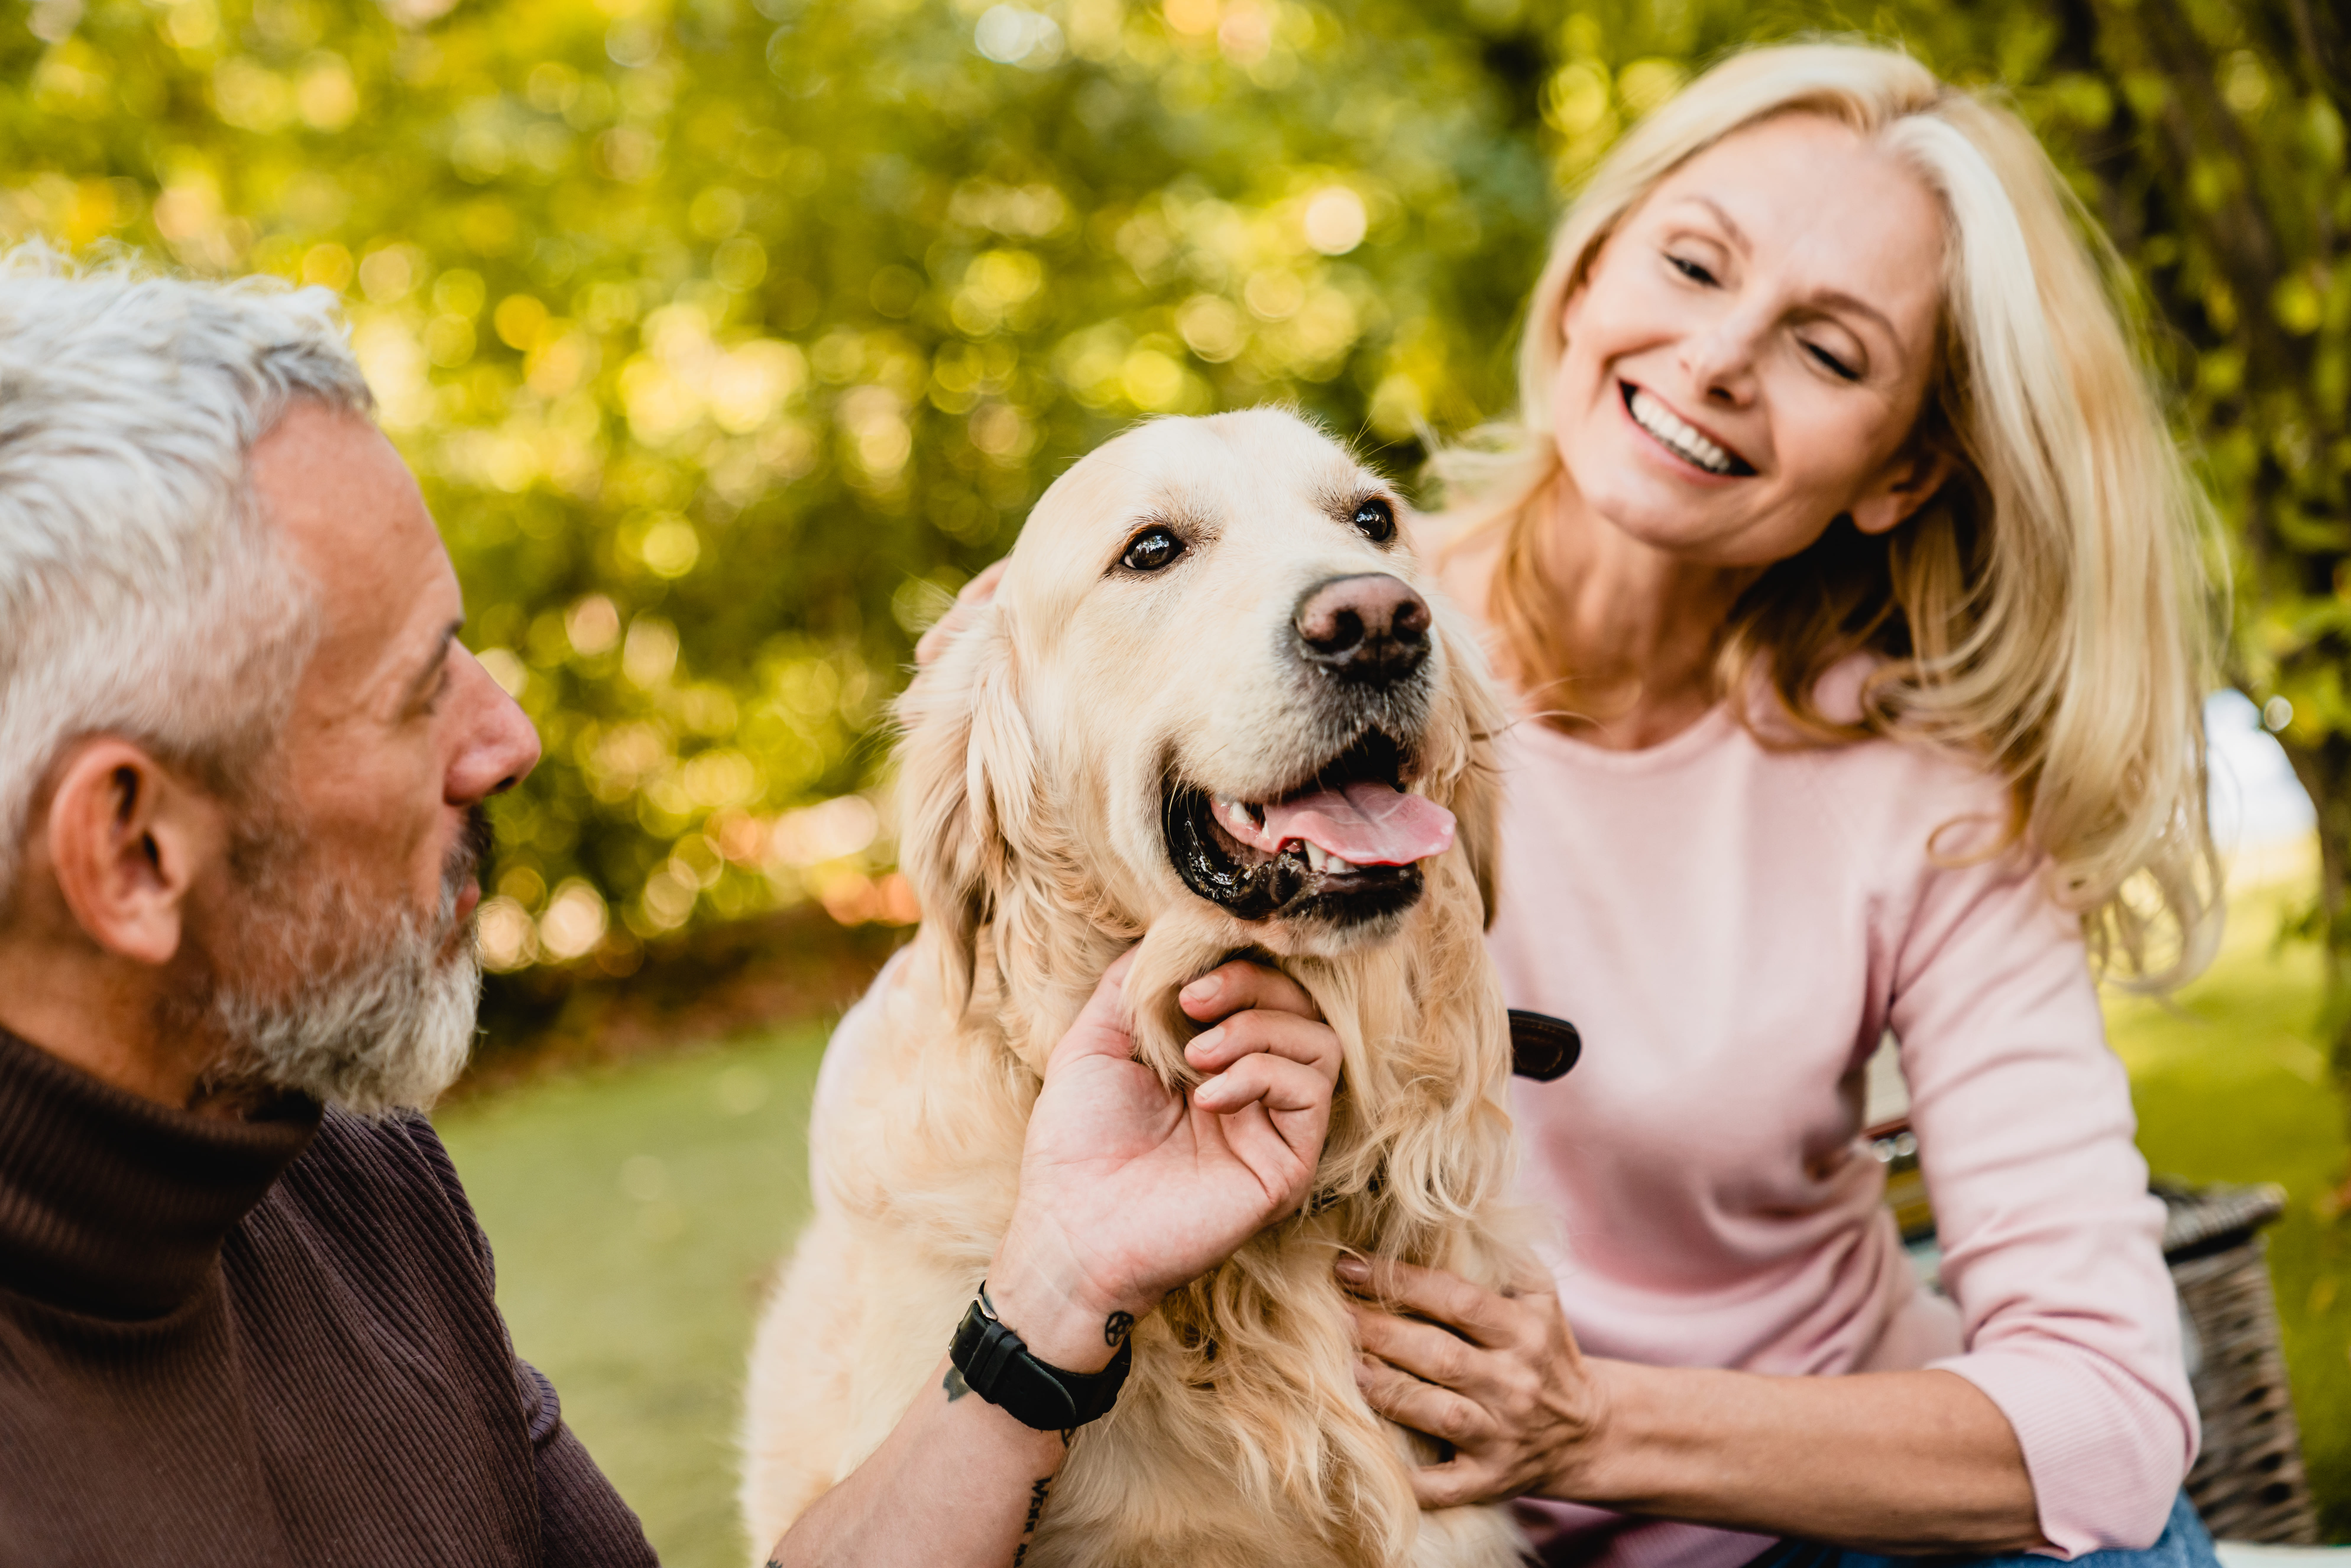 A senior couple petting their dog in a park | Source: Shutterstock